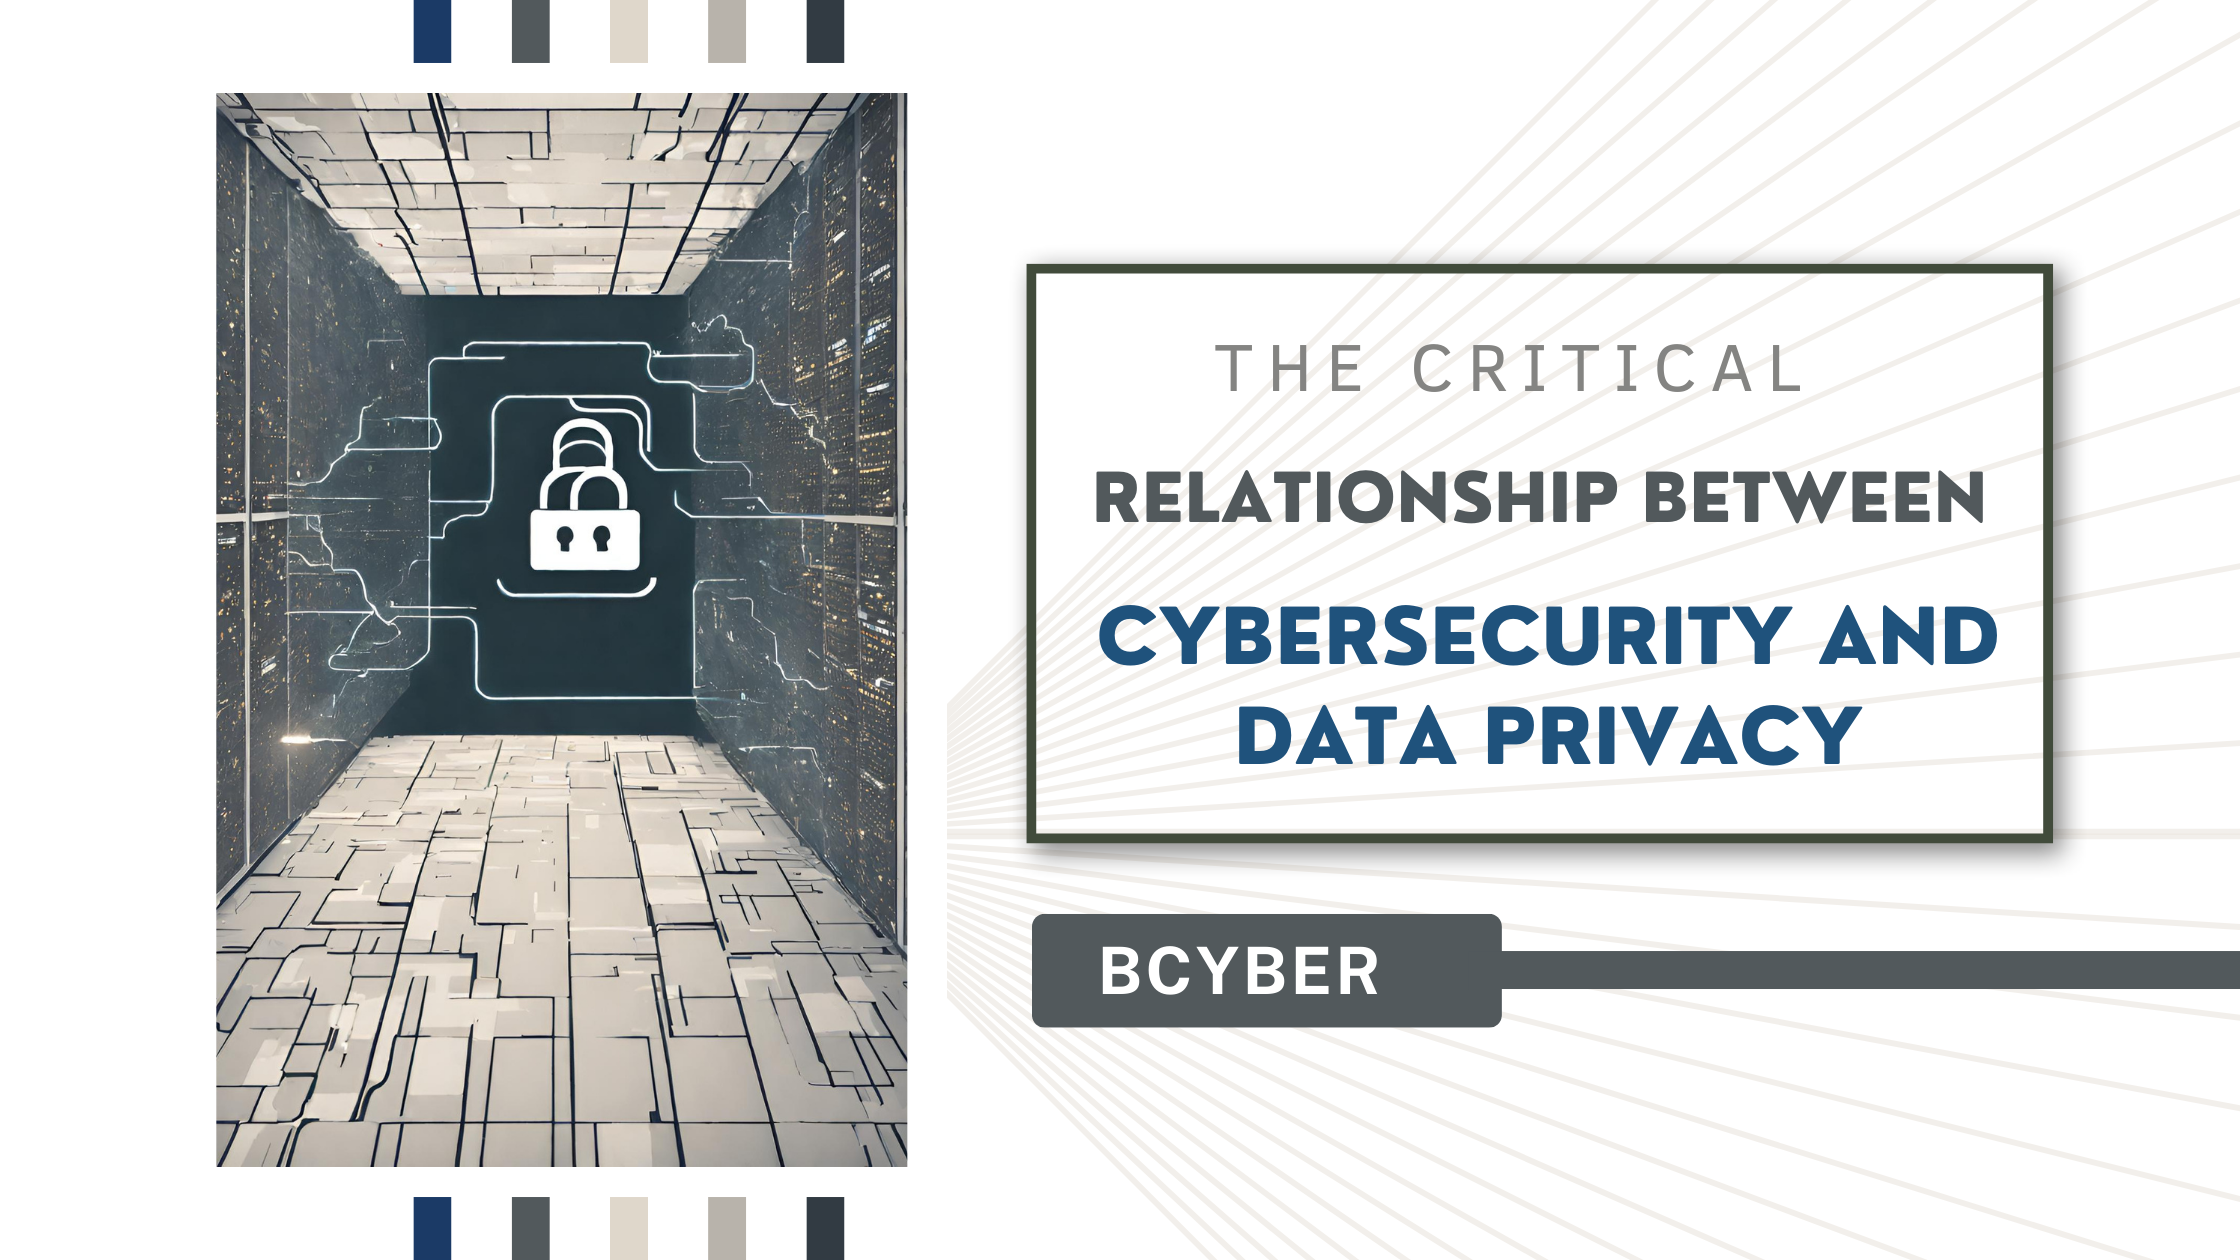 Cybersecurity and data privacy